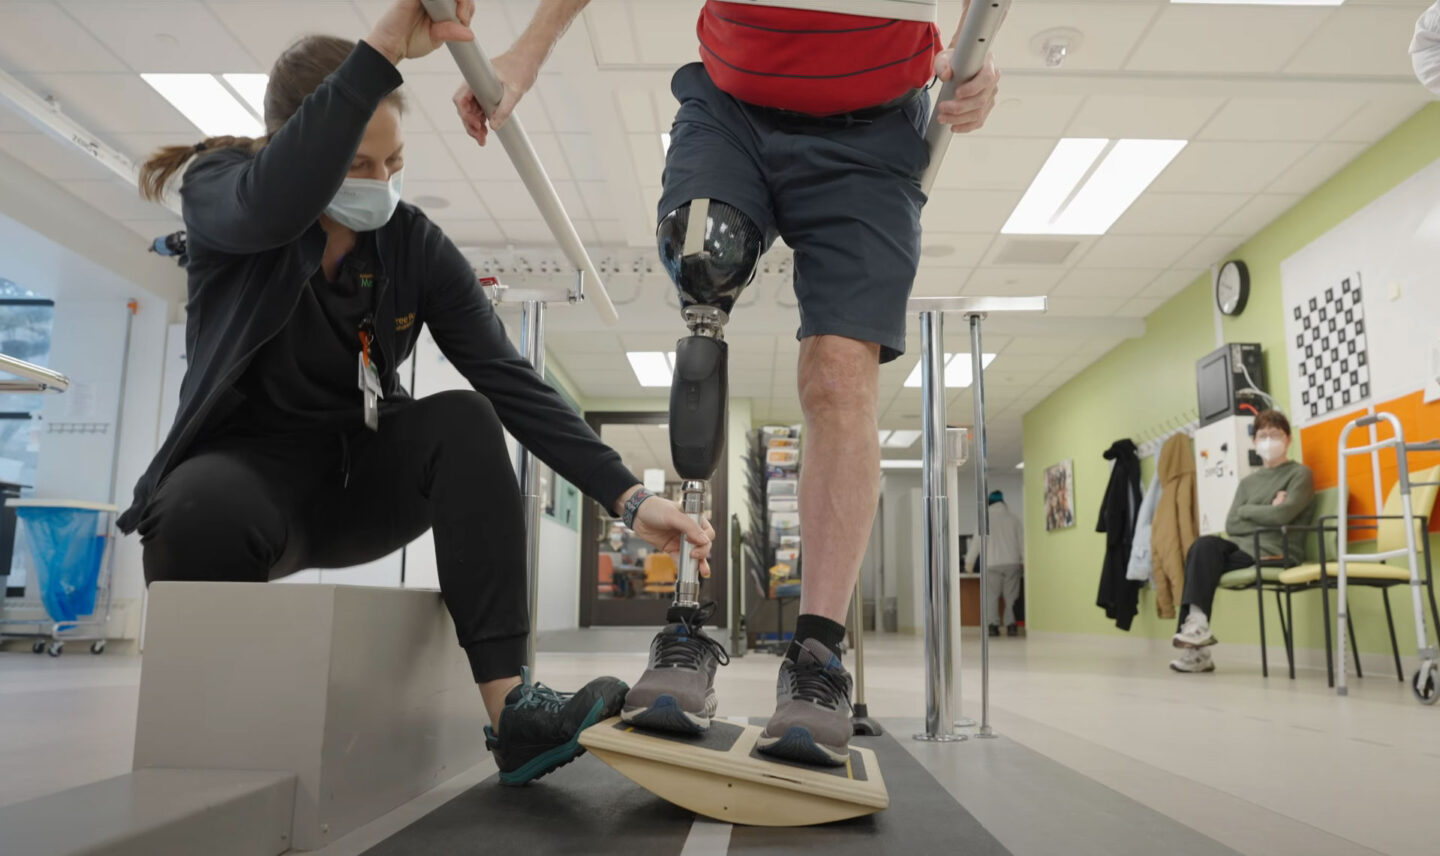 A patient with a prosthetic leg performs balance training with the assistance of a physical therapist.